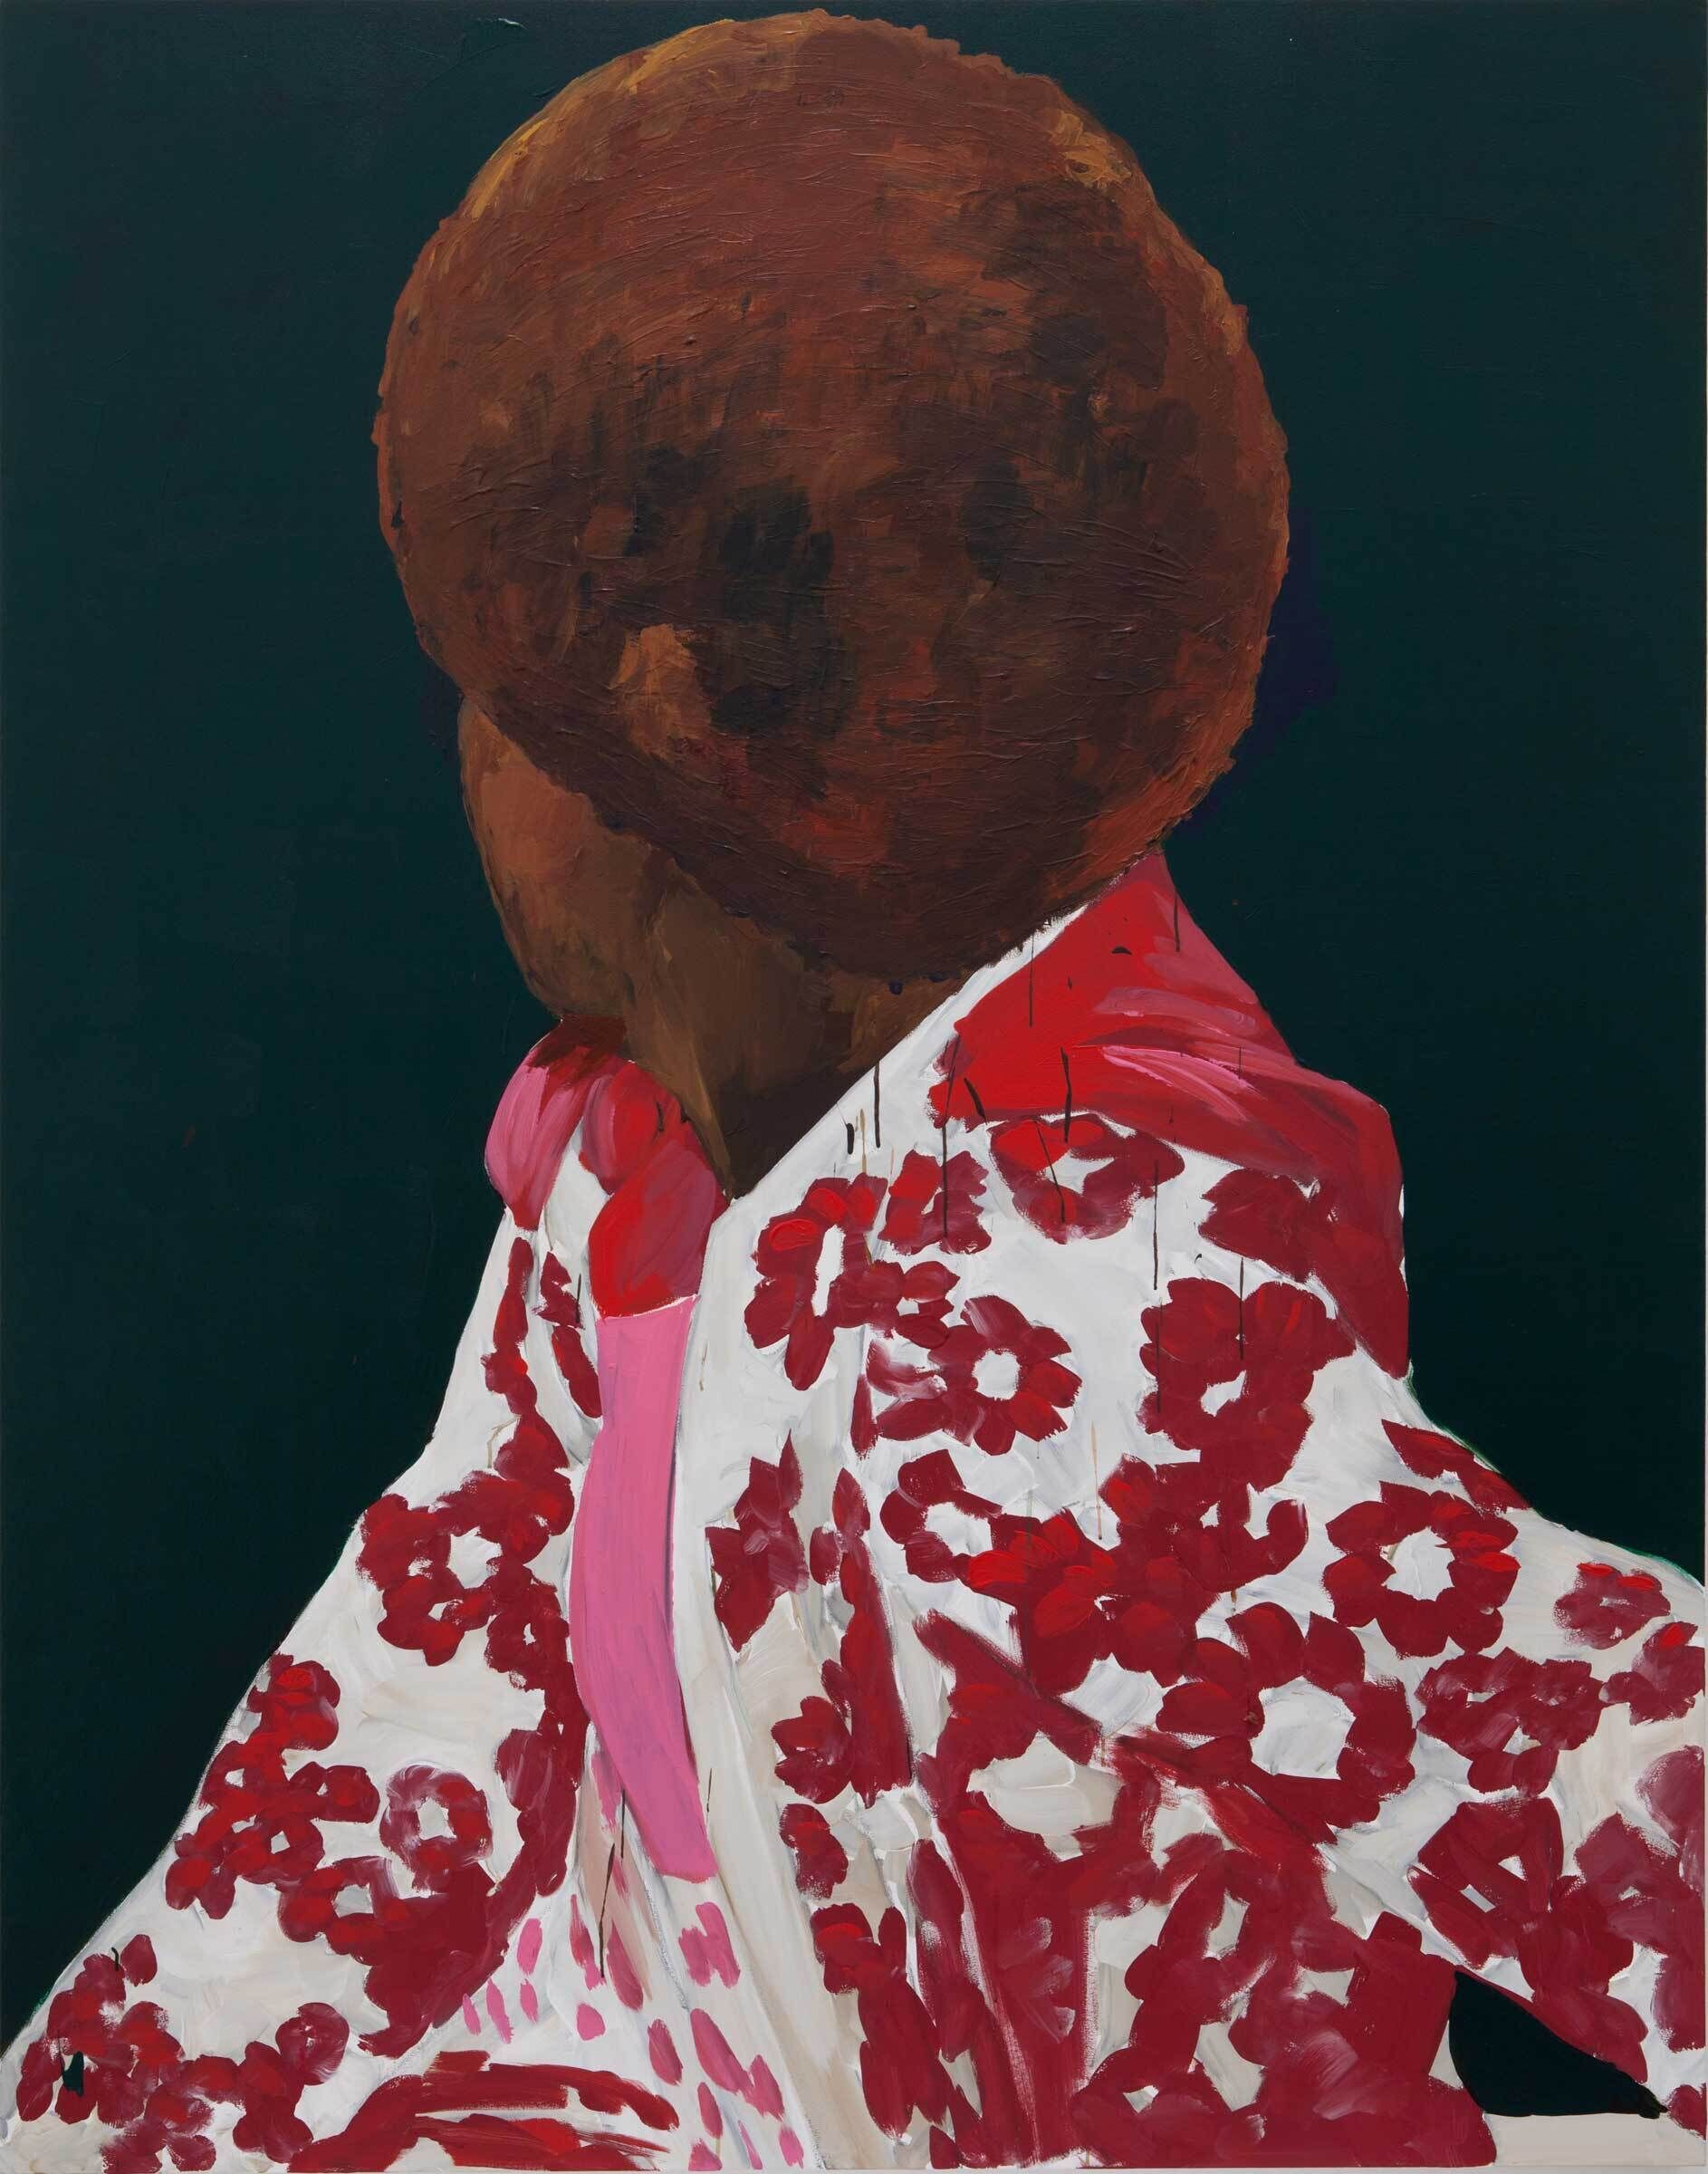 The portrait of a figure turning their face away from the audience, such that only their afro and torso are visible. They are wearing a white hooded jacket with a red floral pattern. The background is a dark green.